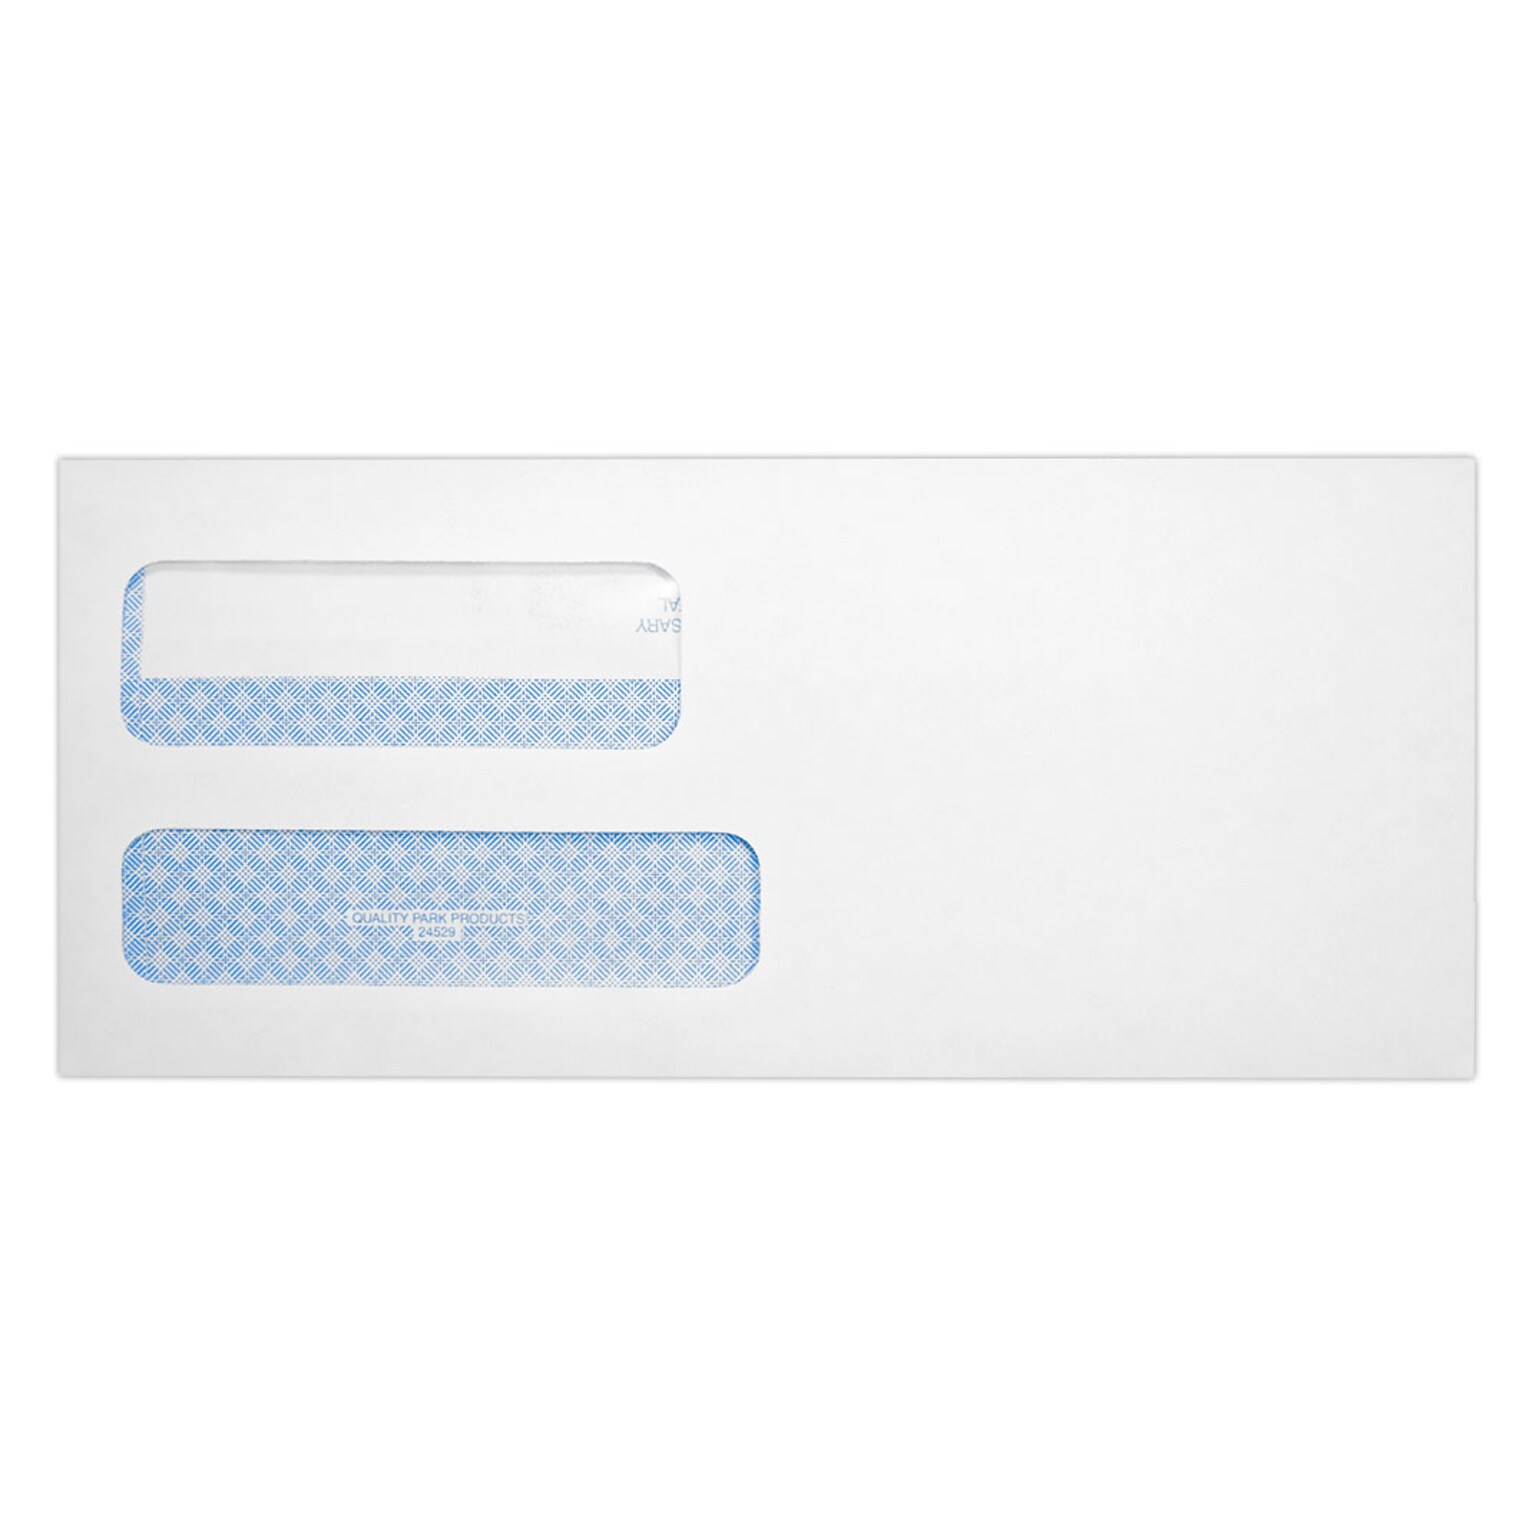 Quality Park Redi-Seal Self Seal Security Tinted #9 Double Window Envelope, 3 7/8 x 8 7/8, White Wove, 250/Pack (24529-250)